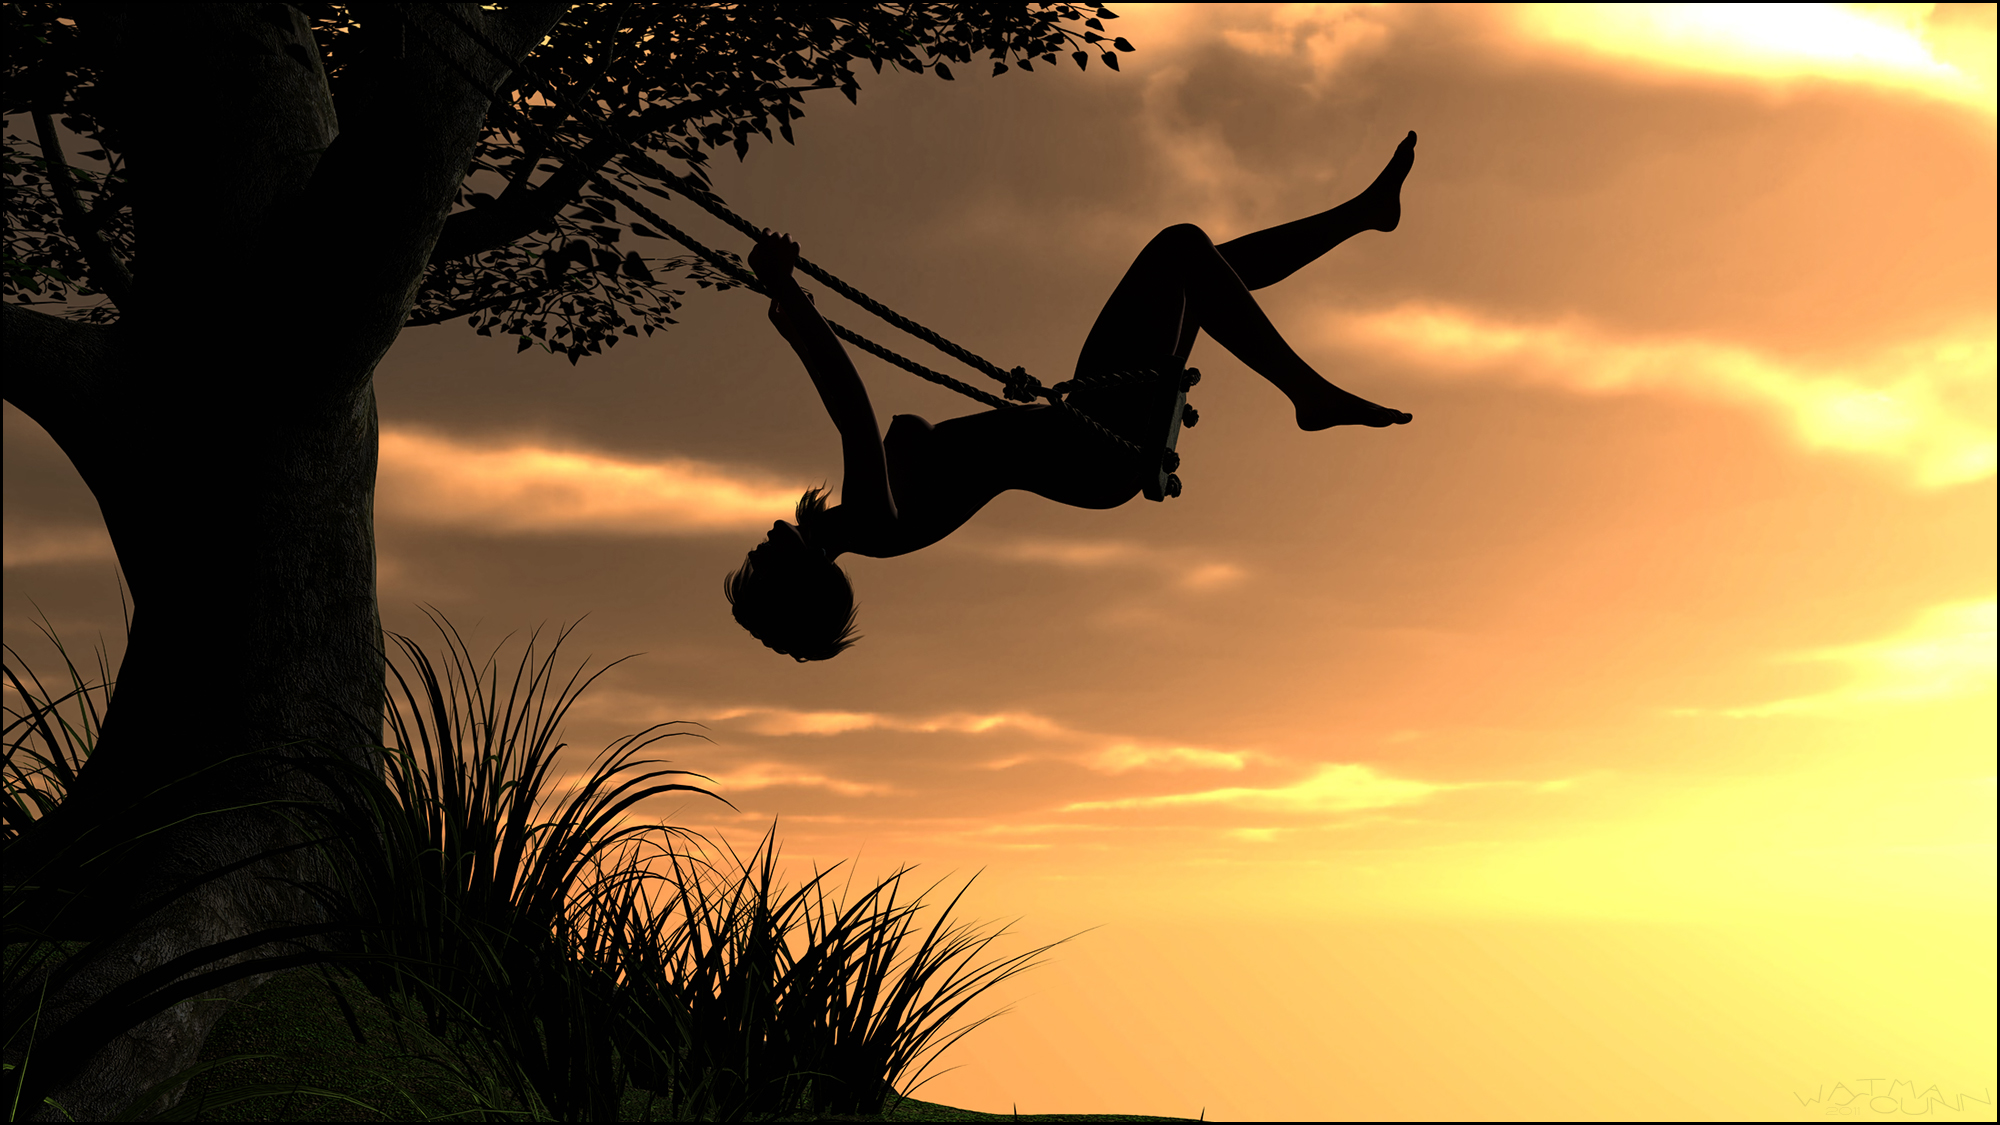 Swinging In The Sunset By Sedorrr